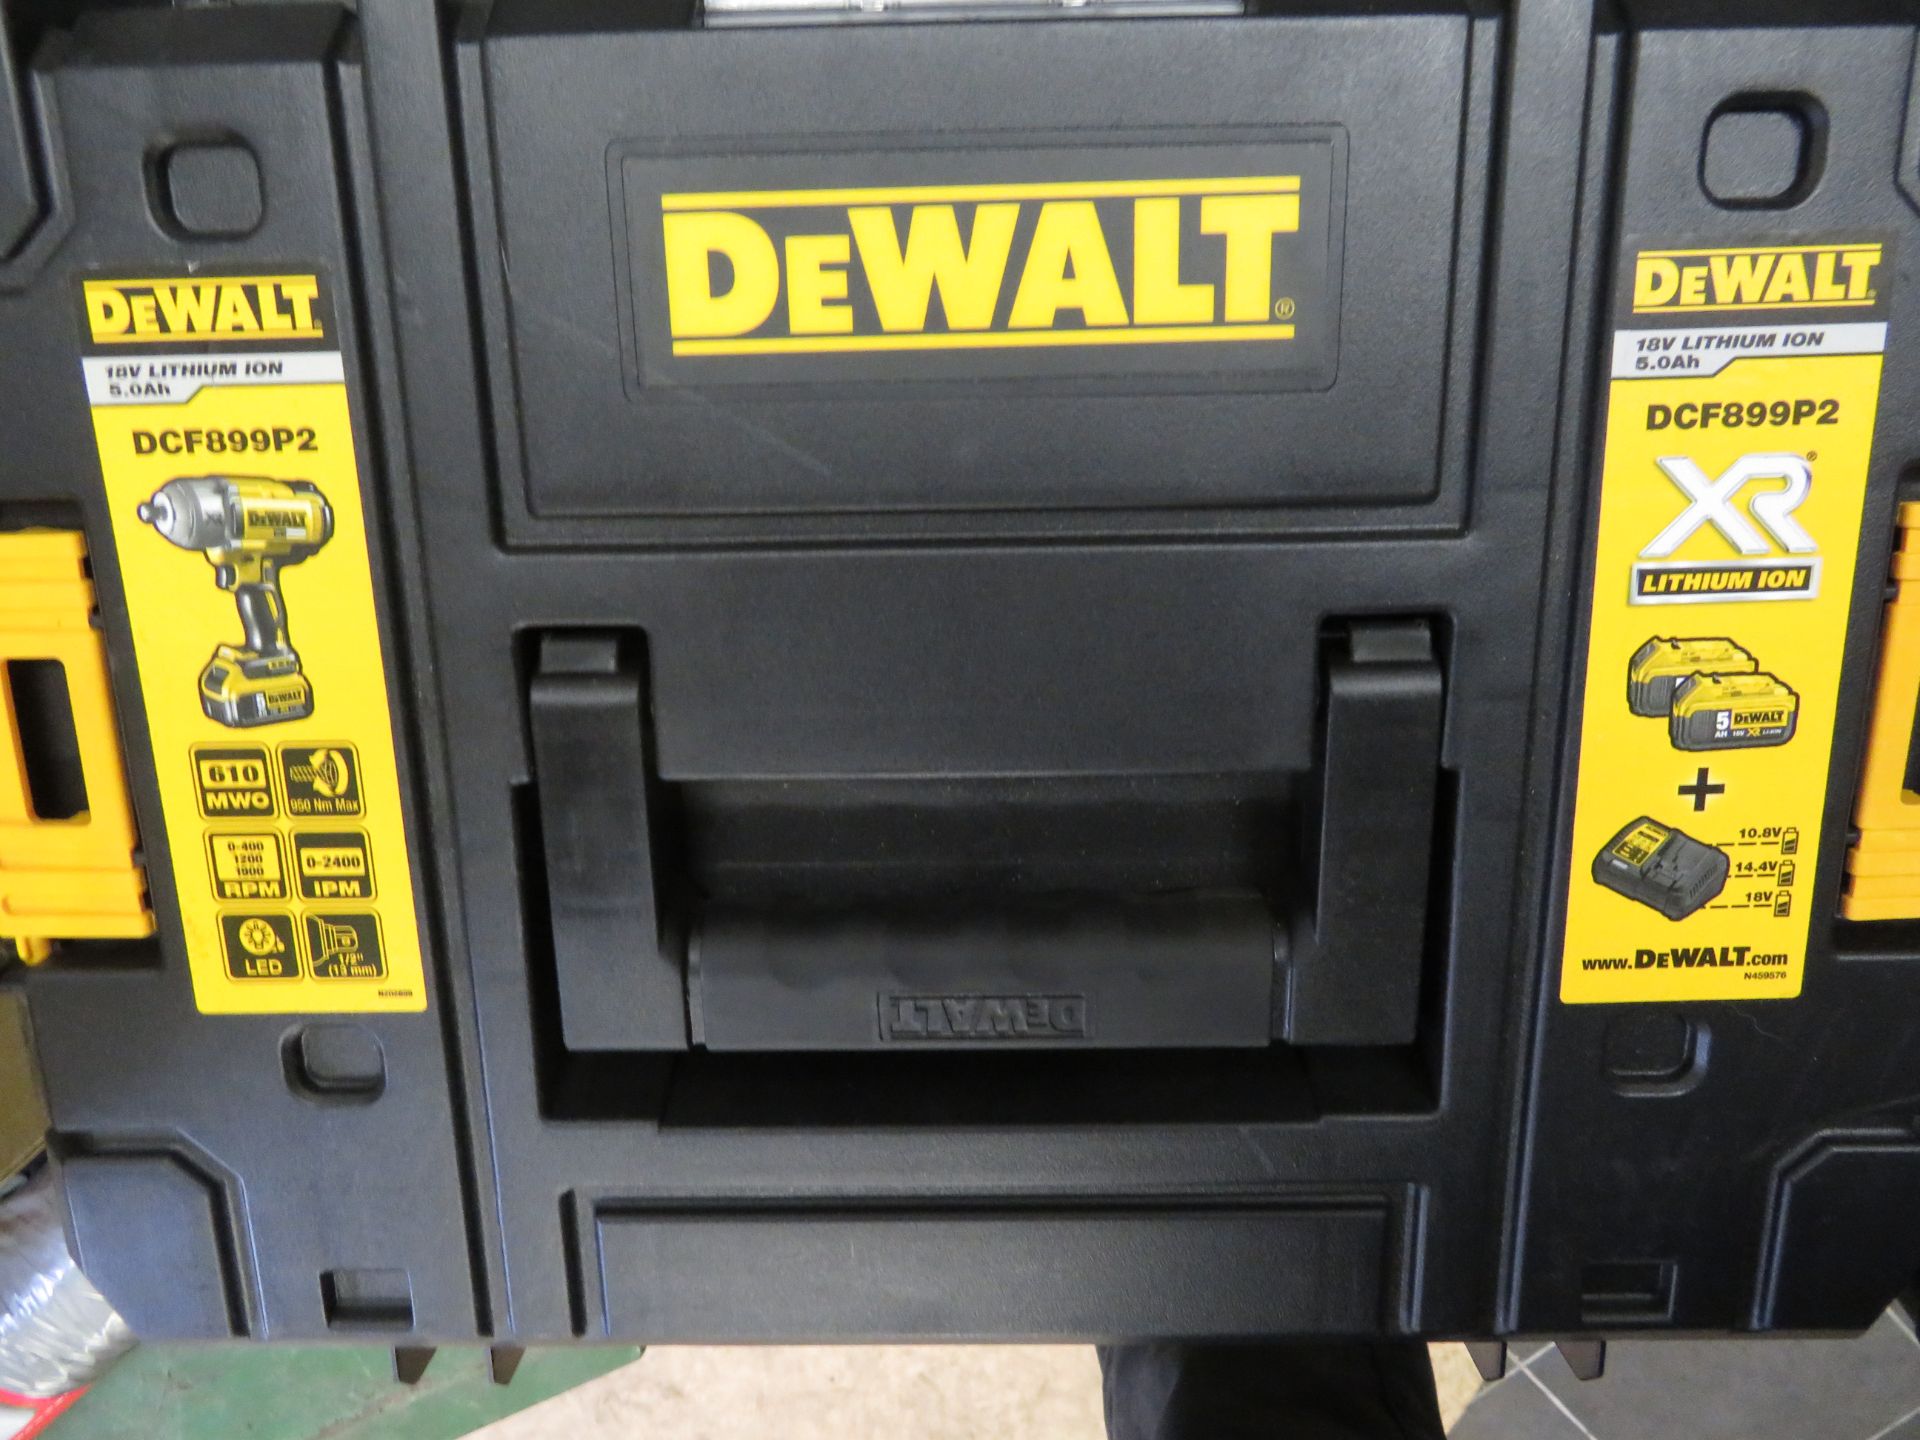 (D20) DEWALT DCF899P2-GB 18V 5.0AH LI-ION CORDLESS IMPACT WRENCH. GOOD USED CONDITION. COMES - Image 3 of 3